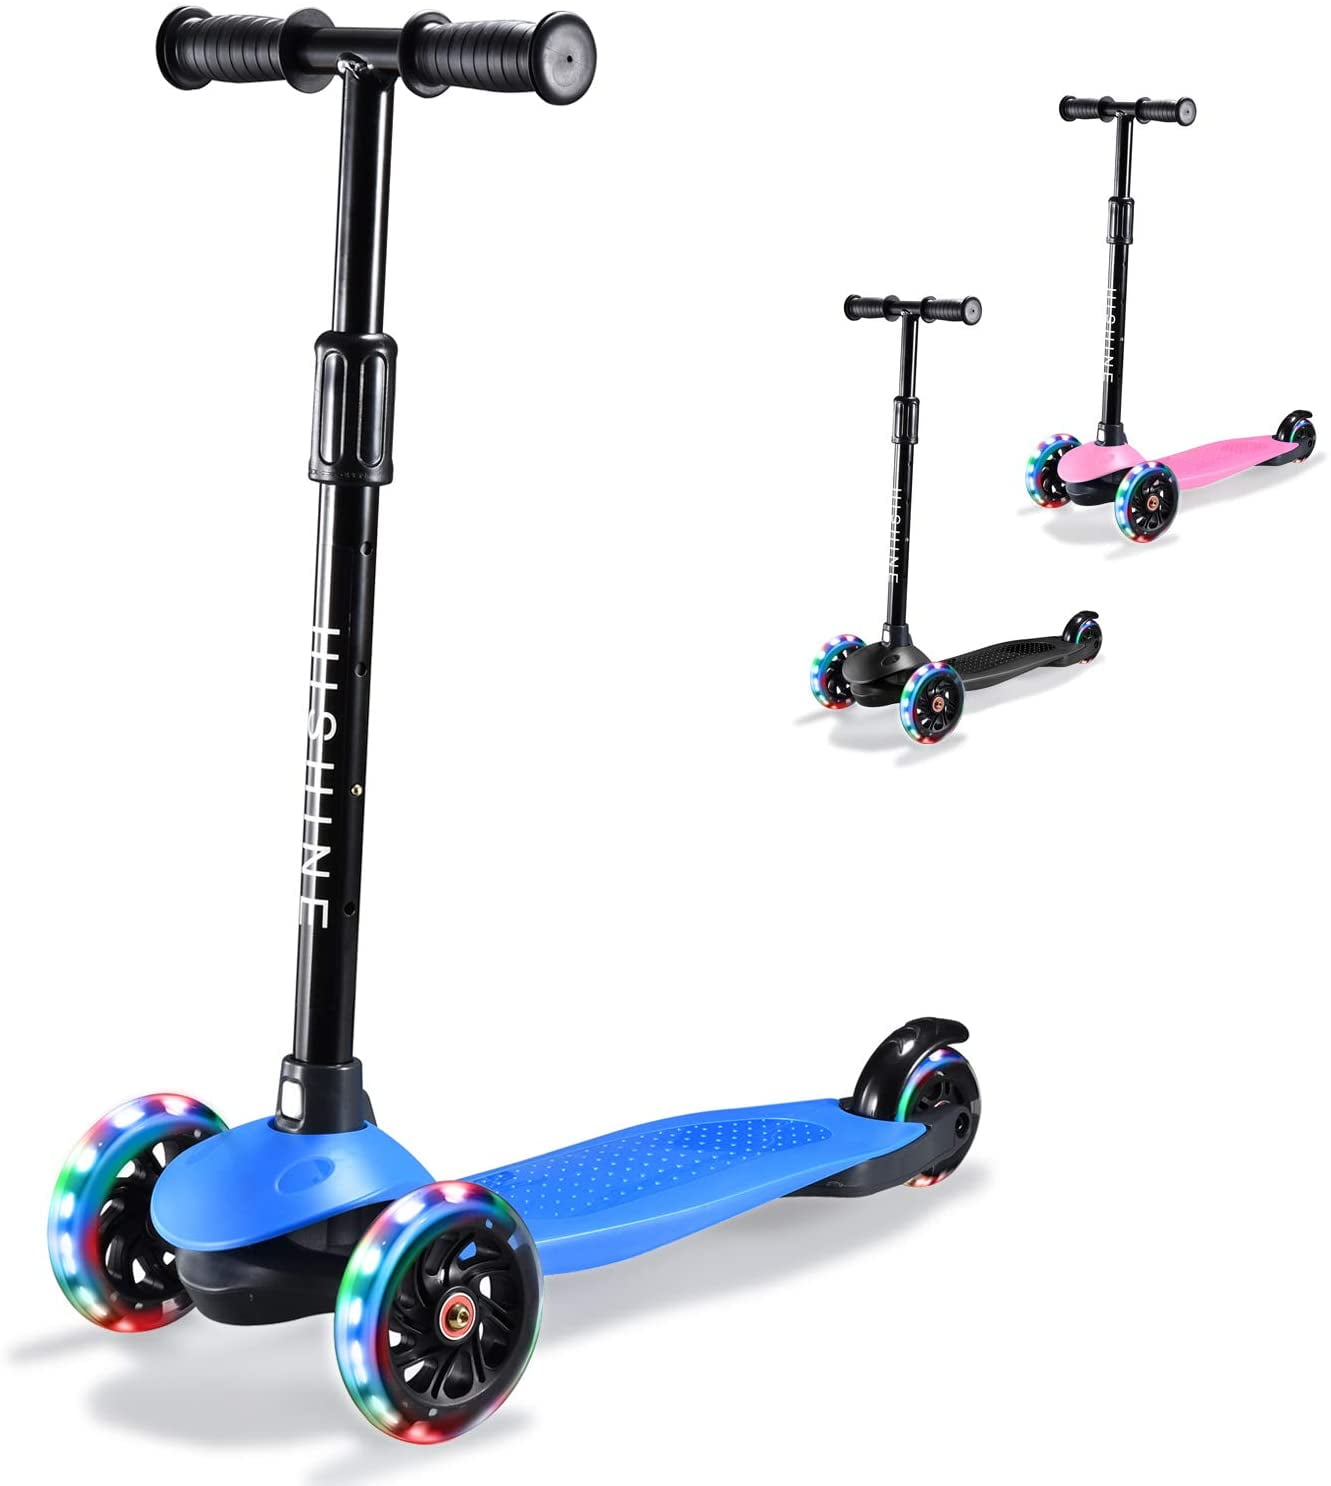 3 LED Wheels Kick Kids Child Toddlers Scooter Adjustable Height For Boys & Girls 